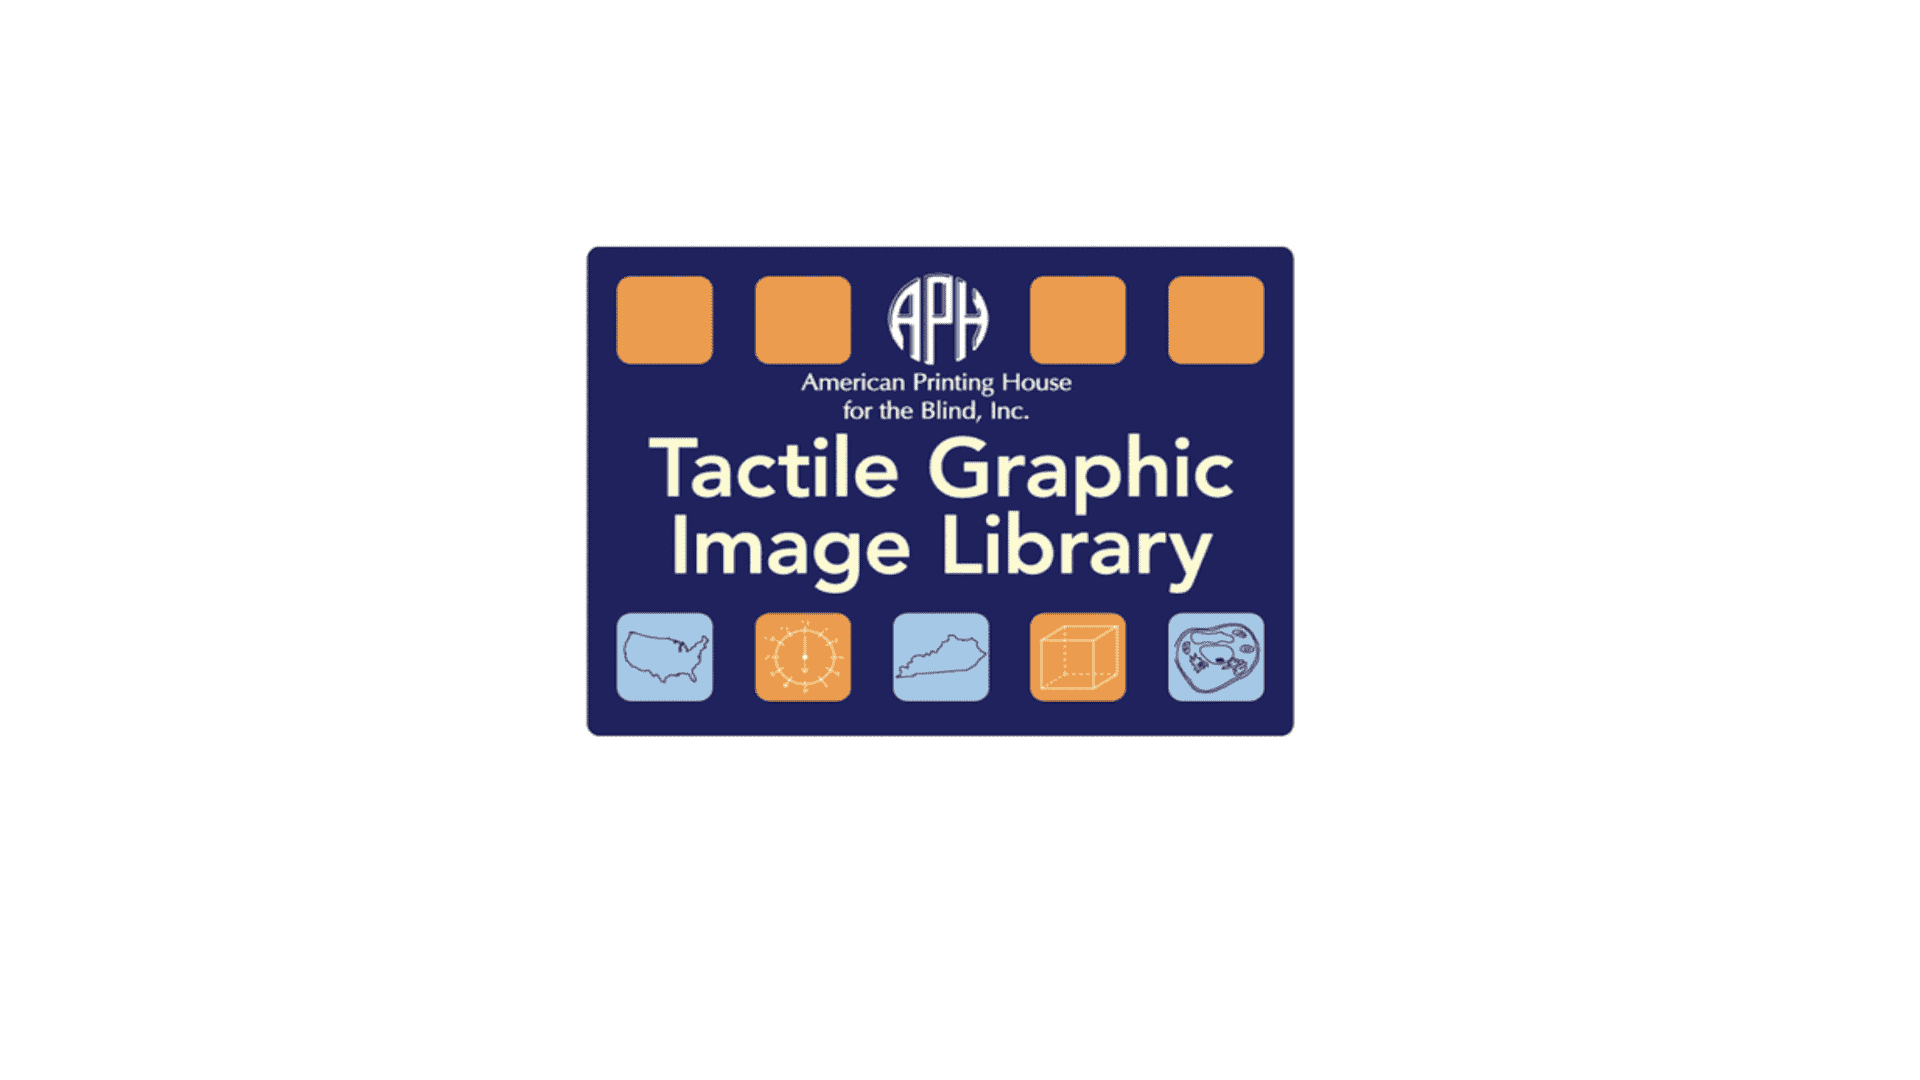 Tactile Graphic Image Library logo